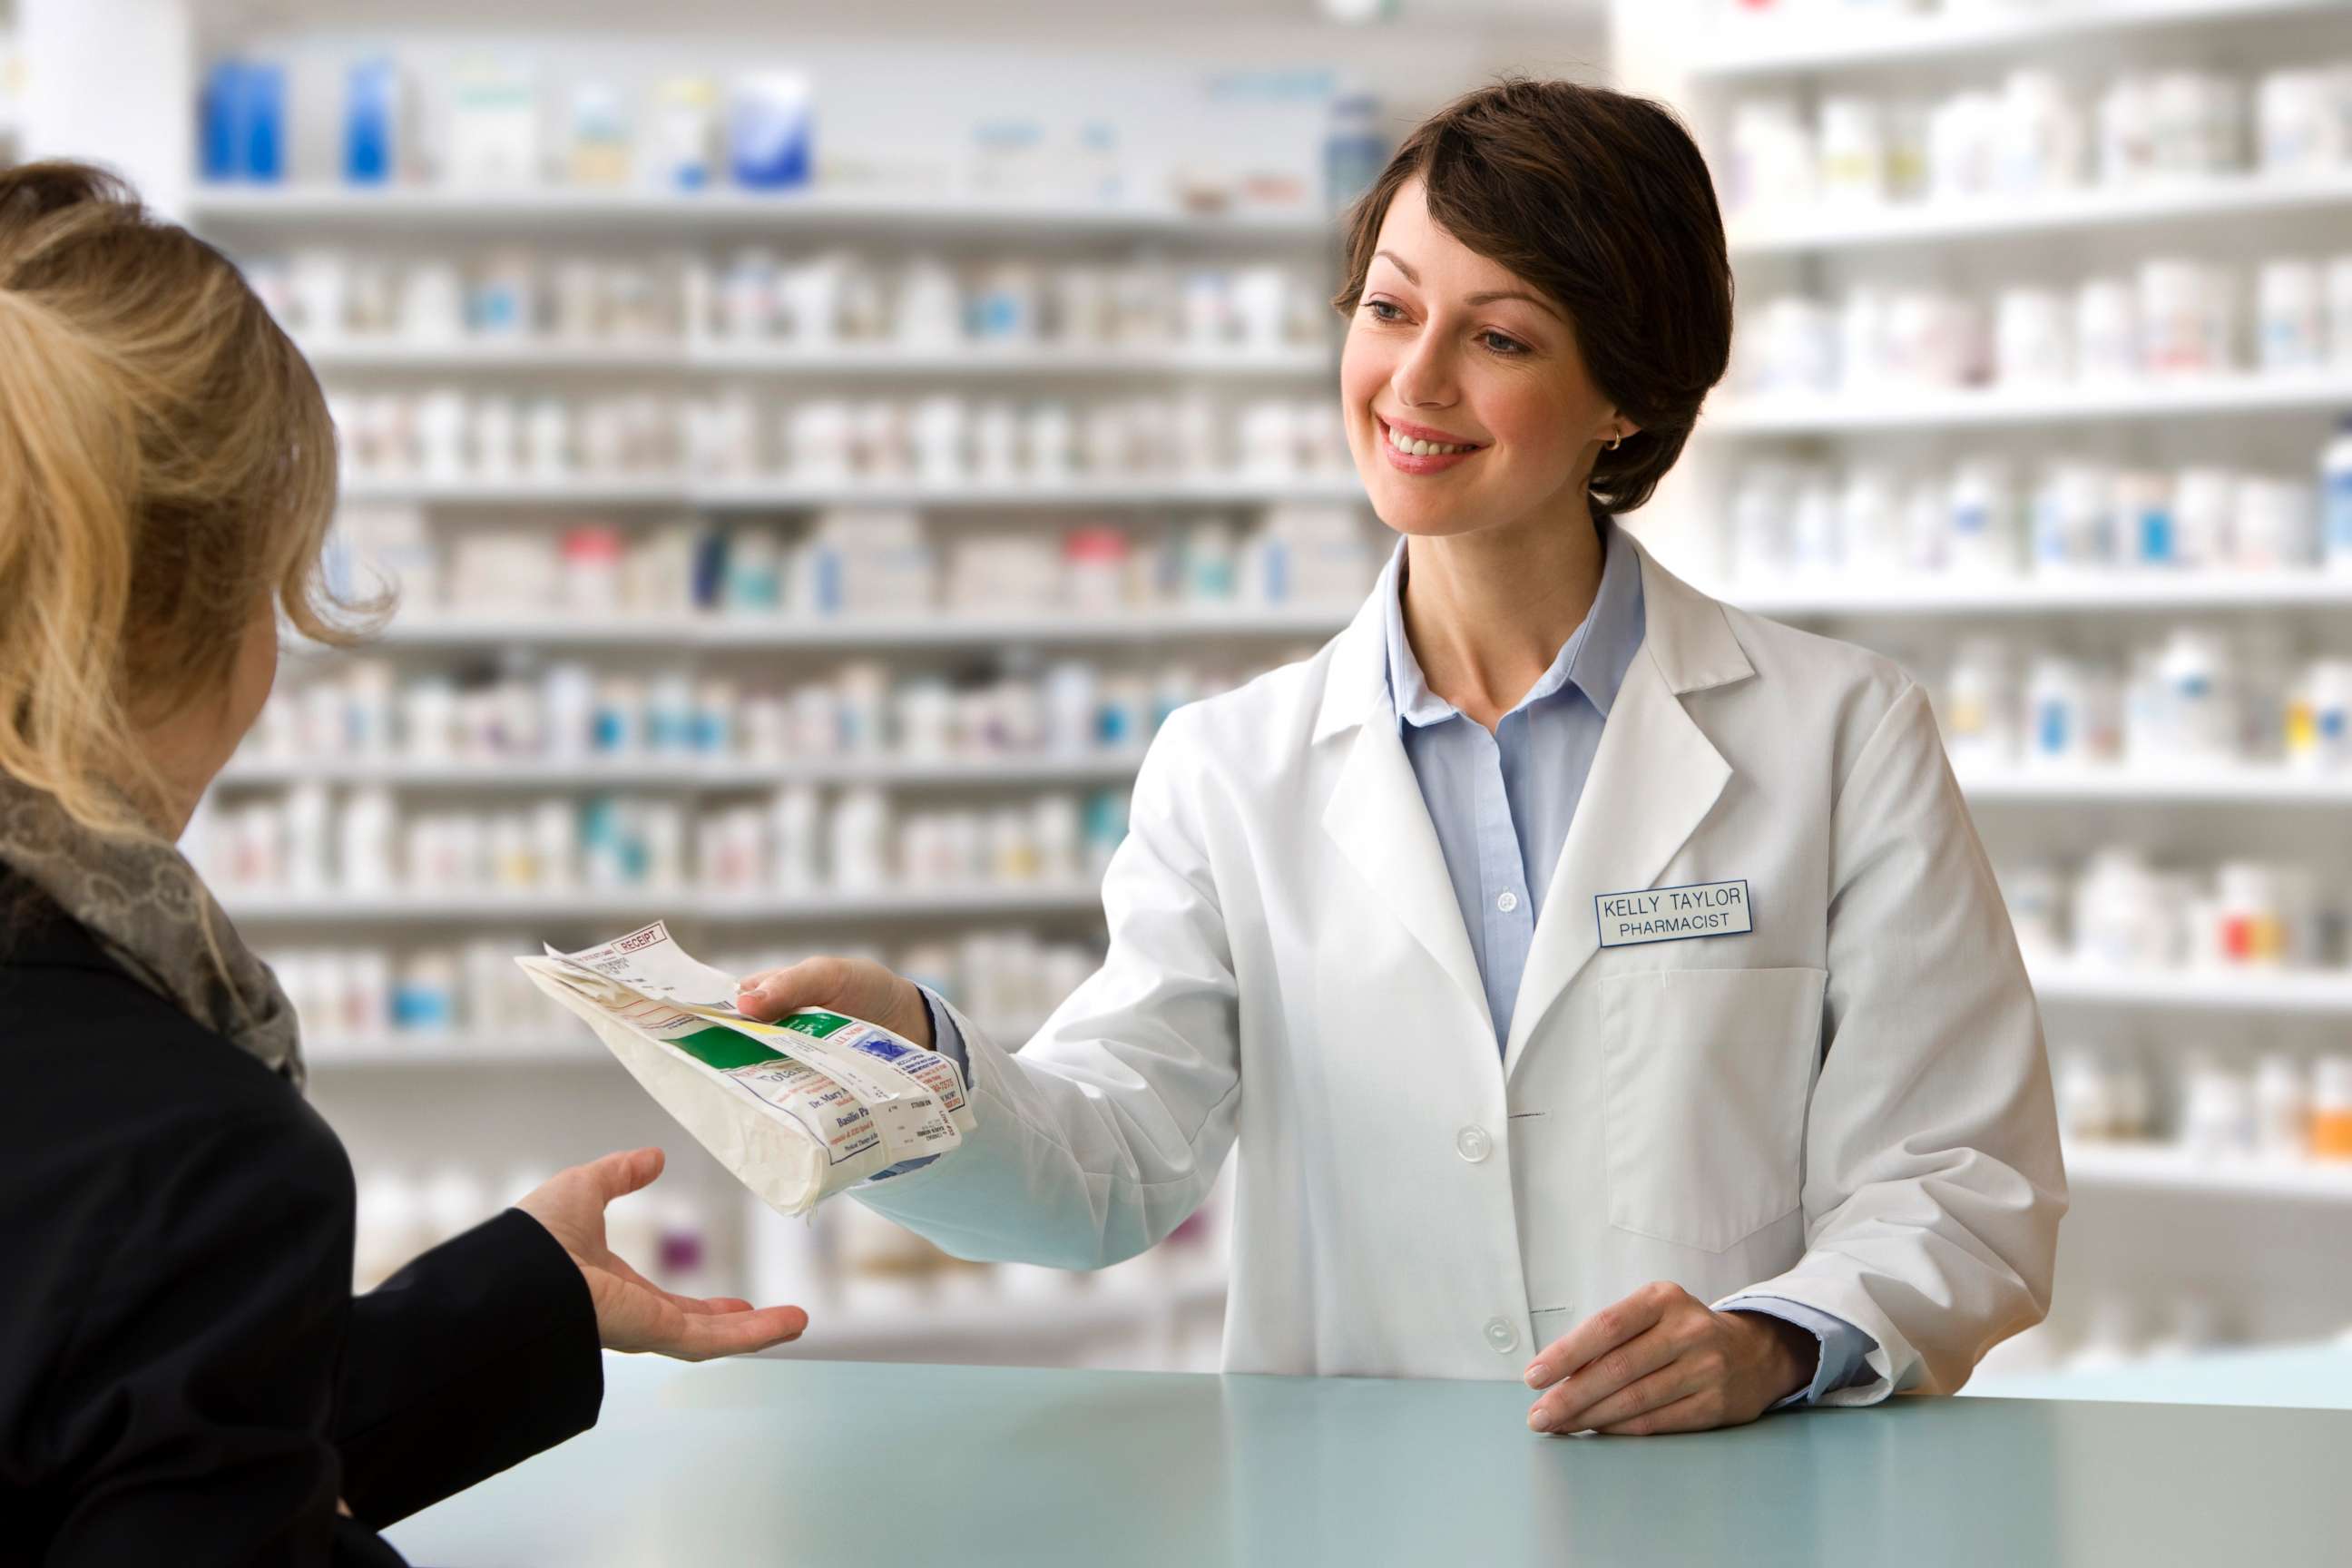 PHOTO: A pharmacist delivers a customer's prescription in this stock photo.